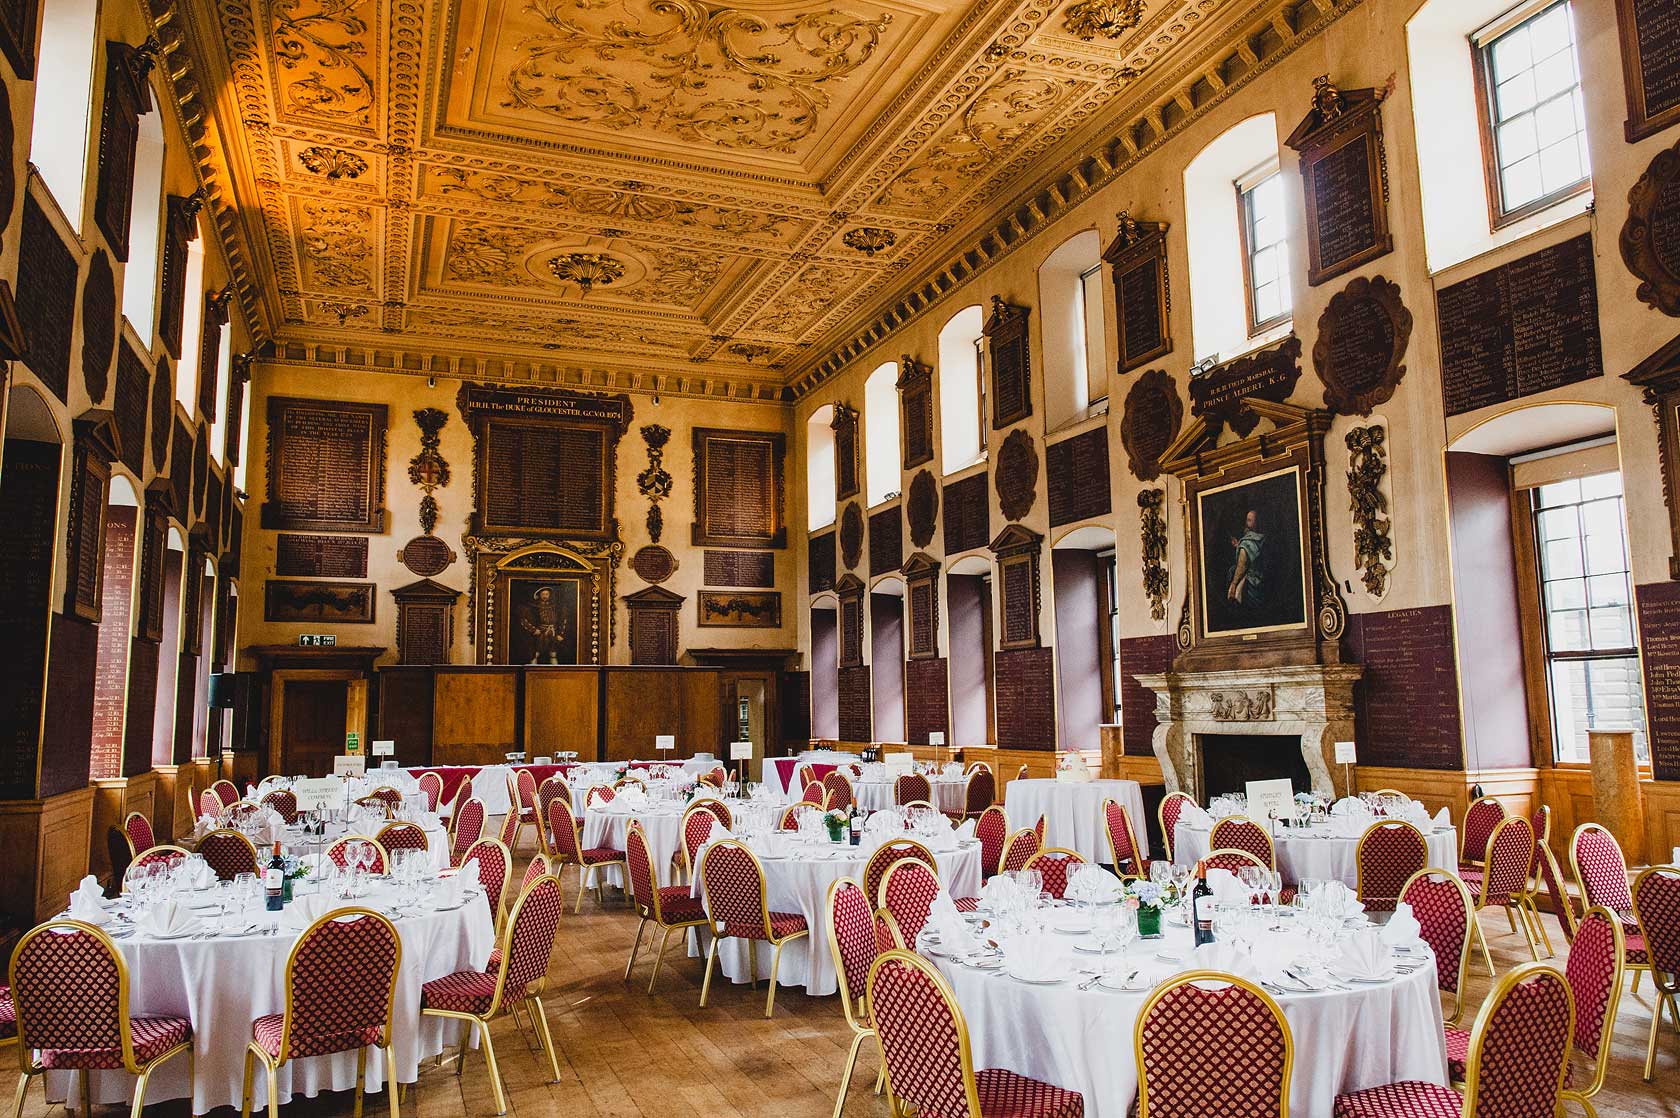 The Great Hall laid out for a wedding reception